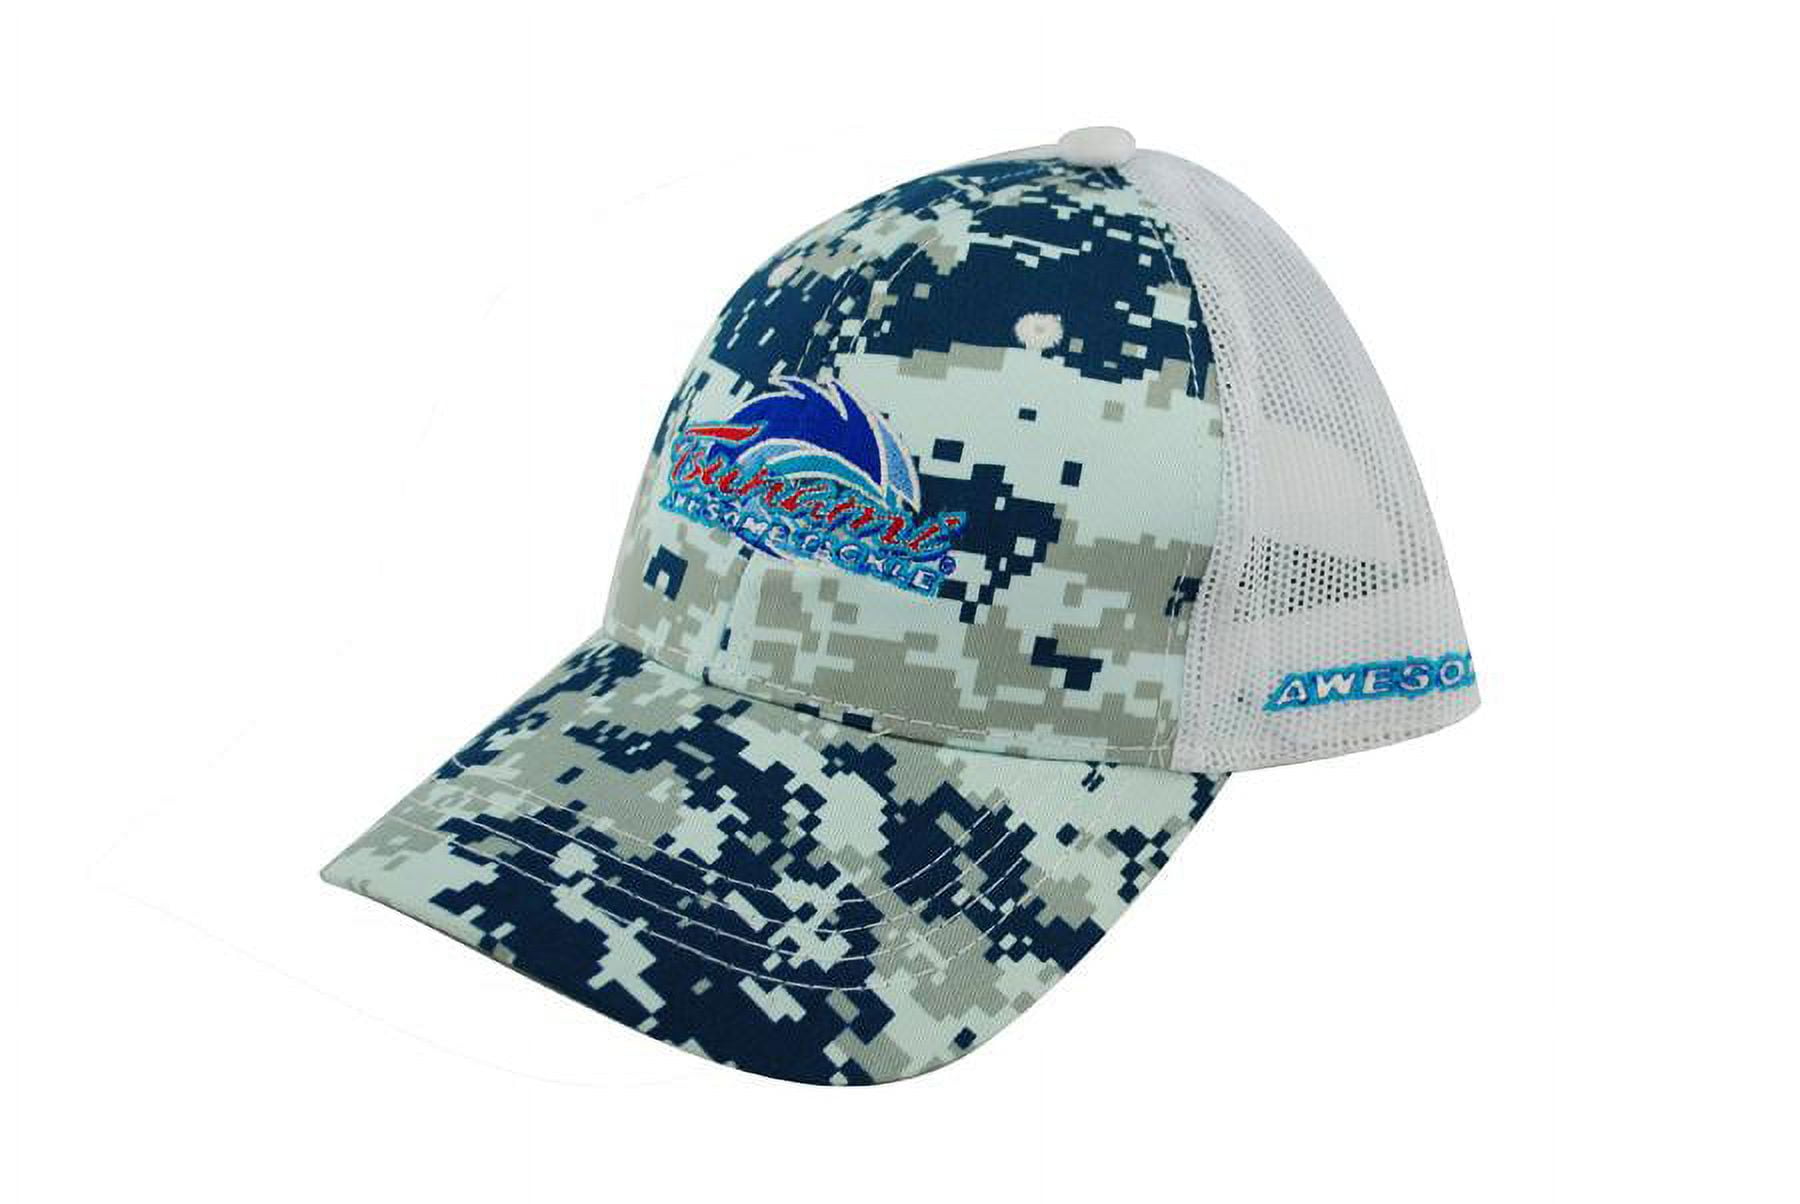 Fishers Catch Outfitters Camo Hat